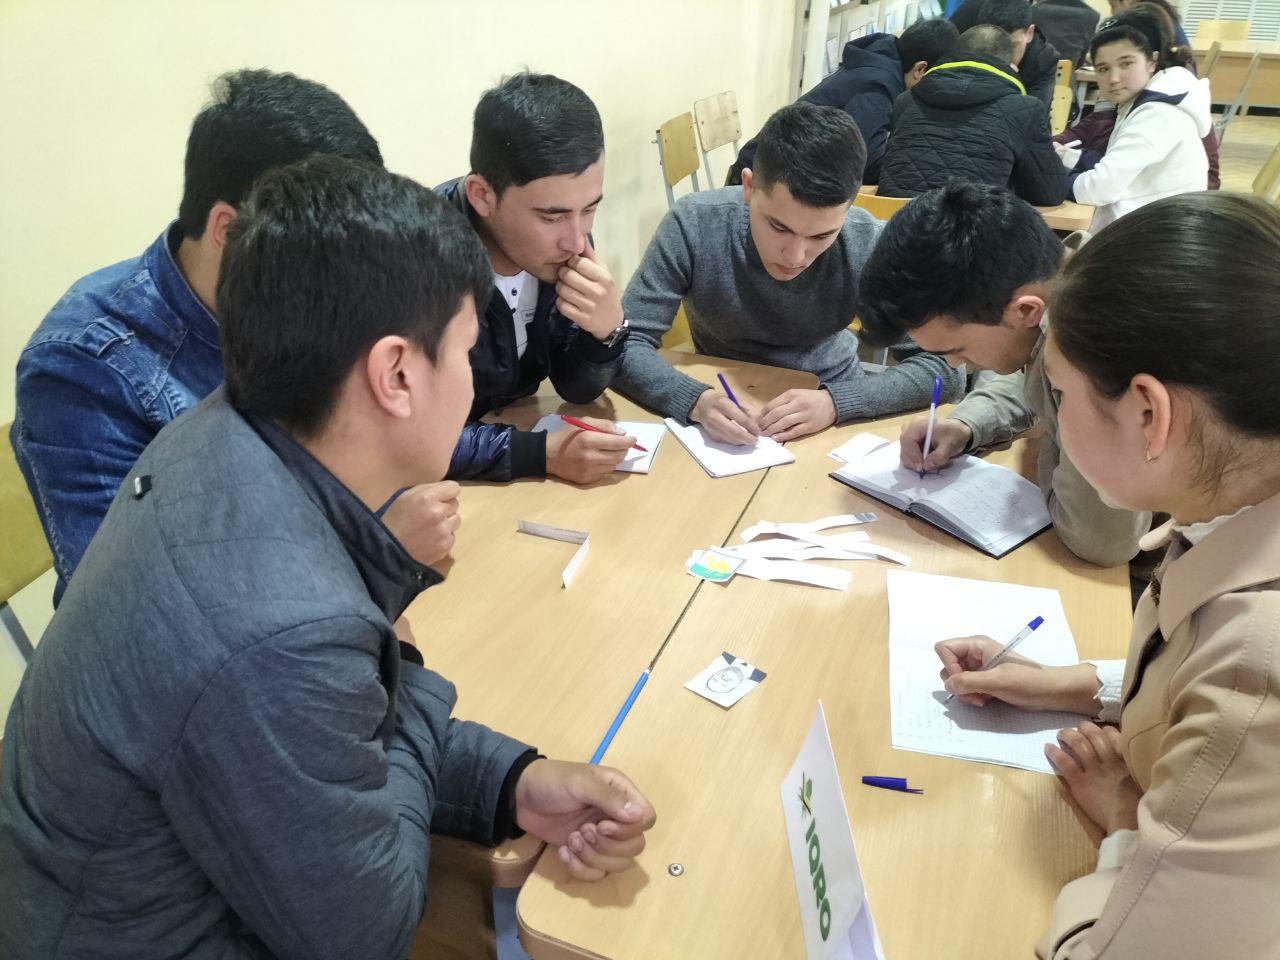 THE 3rd ROUND OF “ZAKOVAT” INTELLECTUAL GAME  WAS HELD